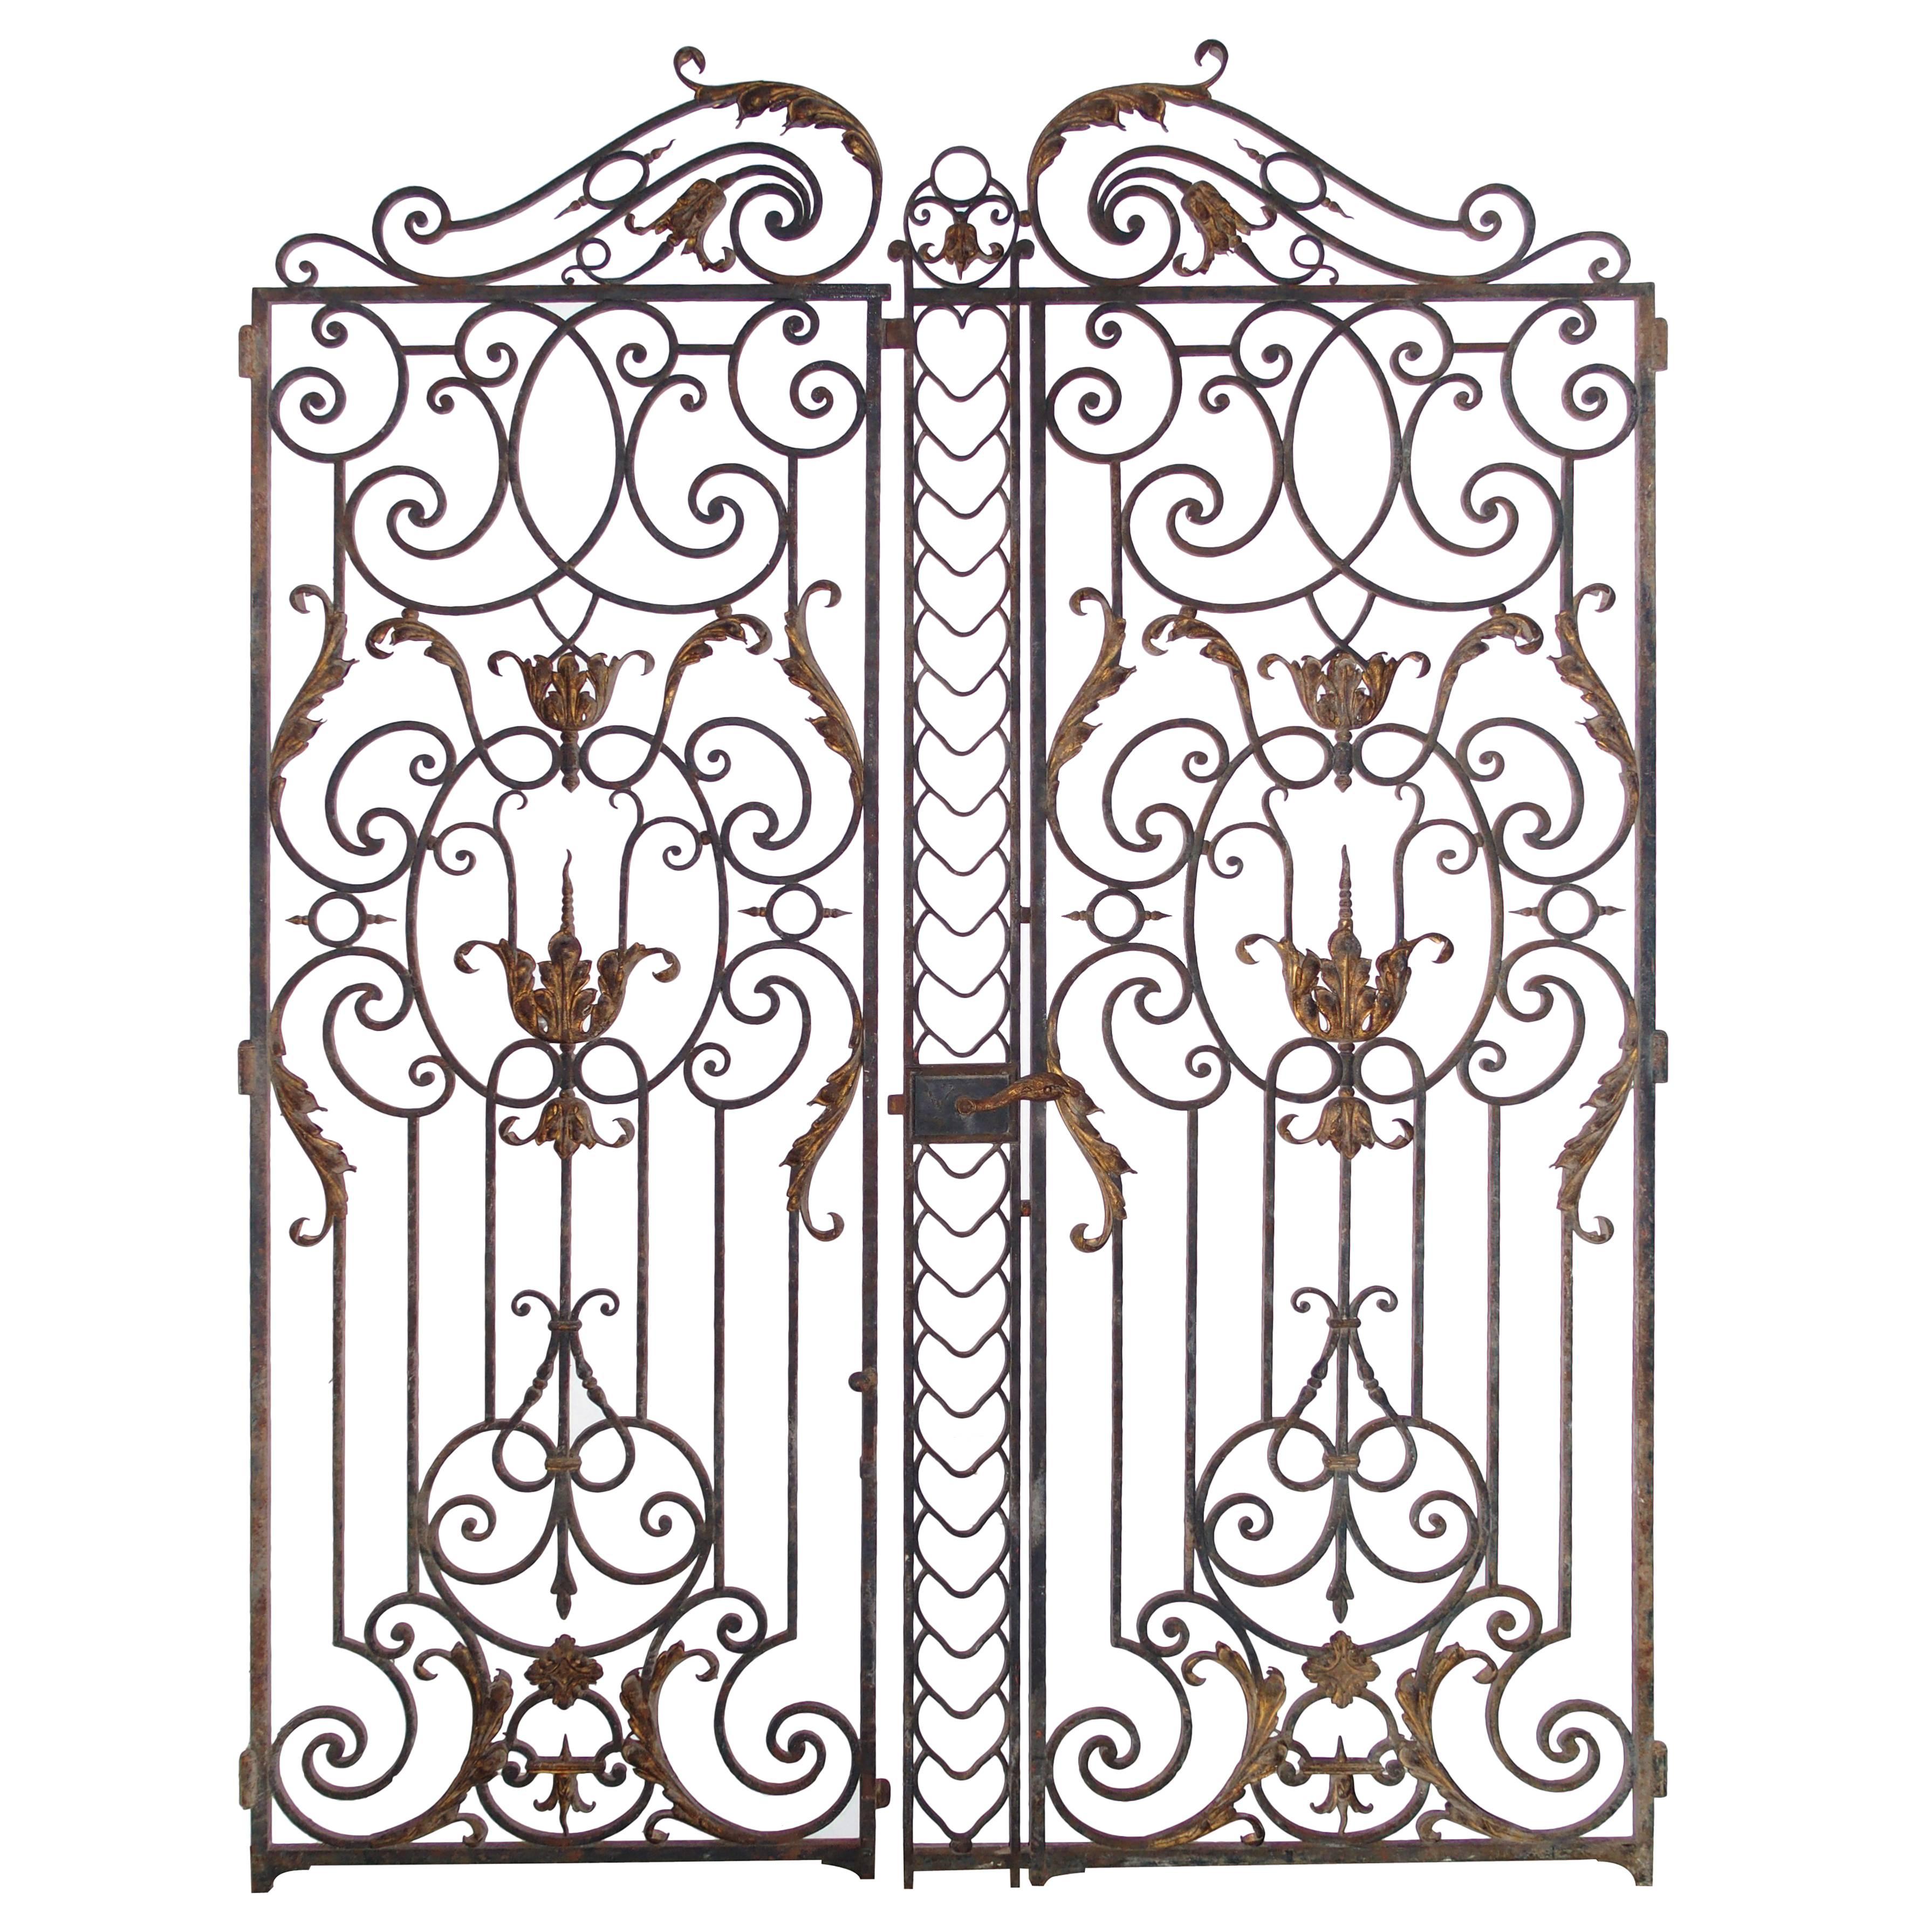 Pair of Magnificent 18th Century French Chateau Gates